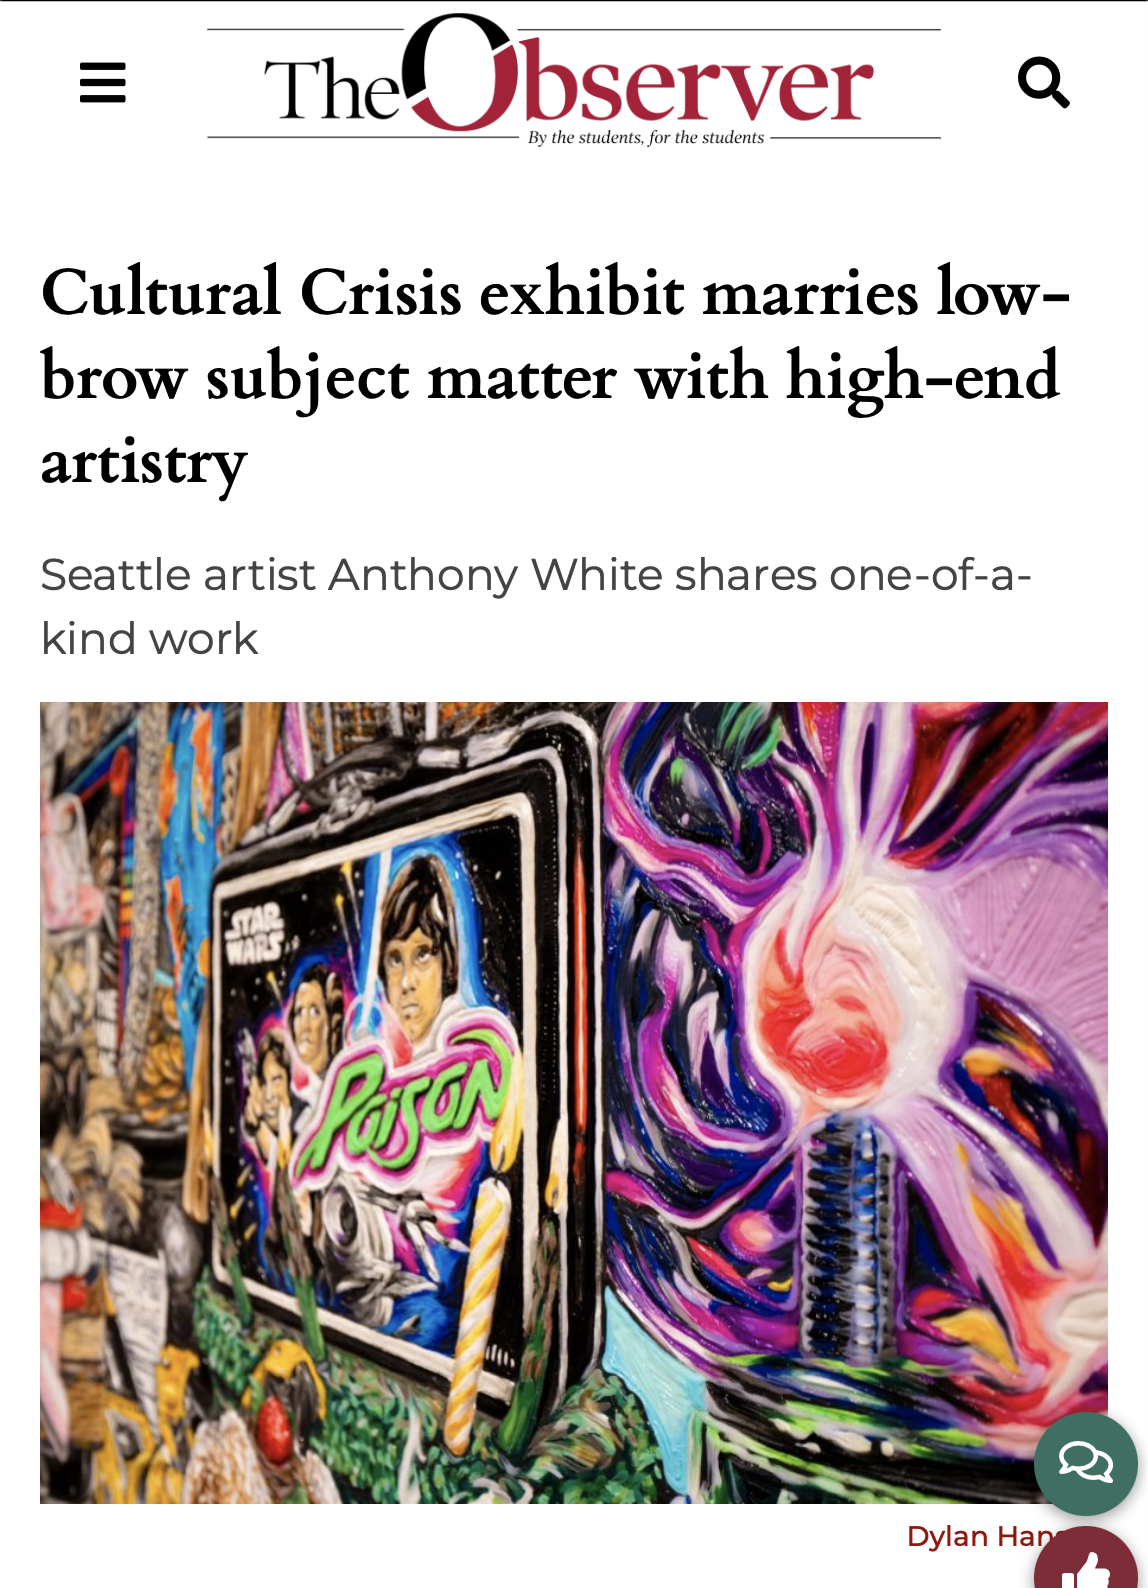 The Observer: Cultural Crisis exhibit marries low-brow subject matter with high-end artistry